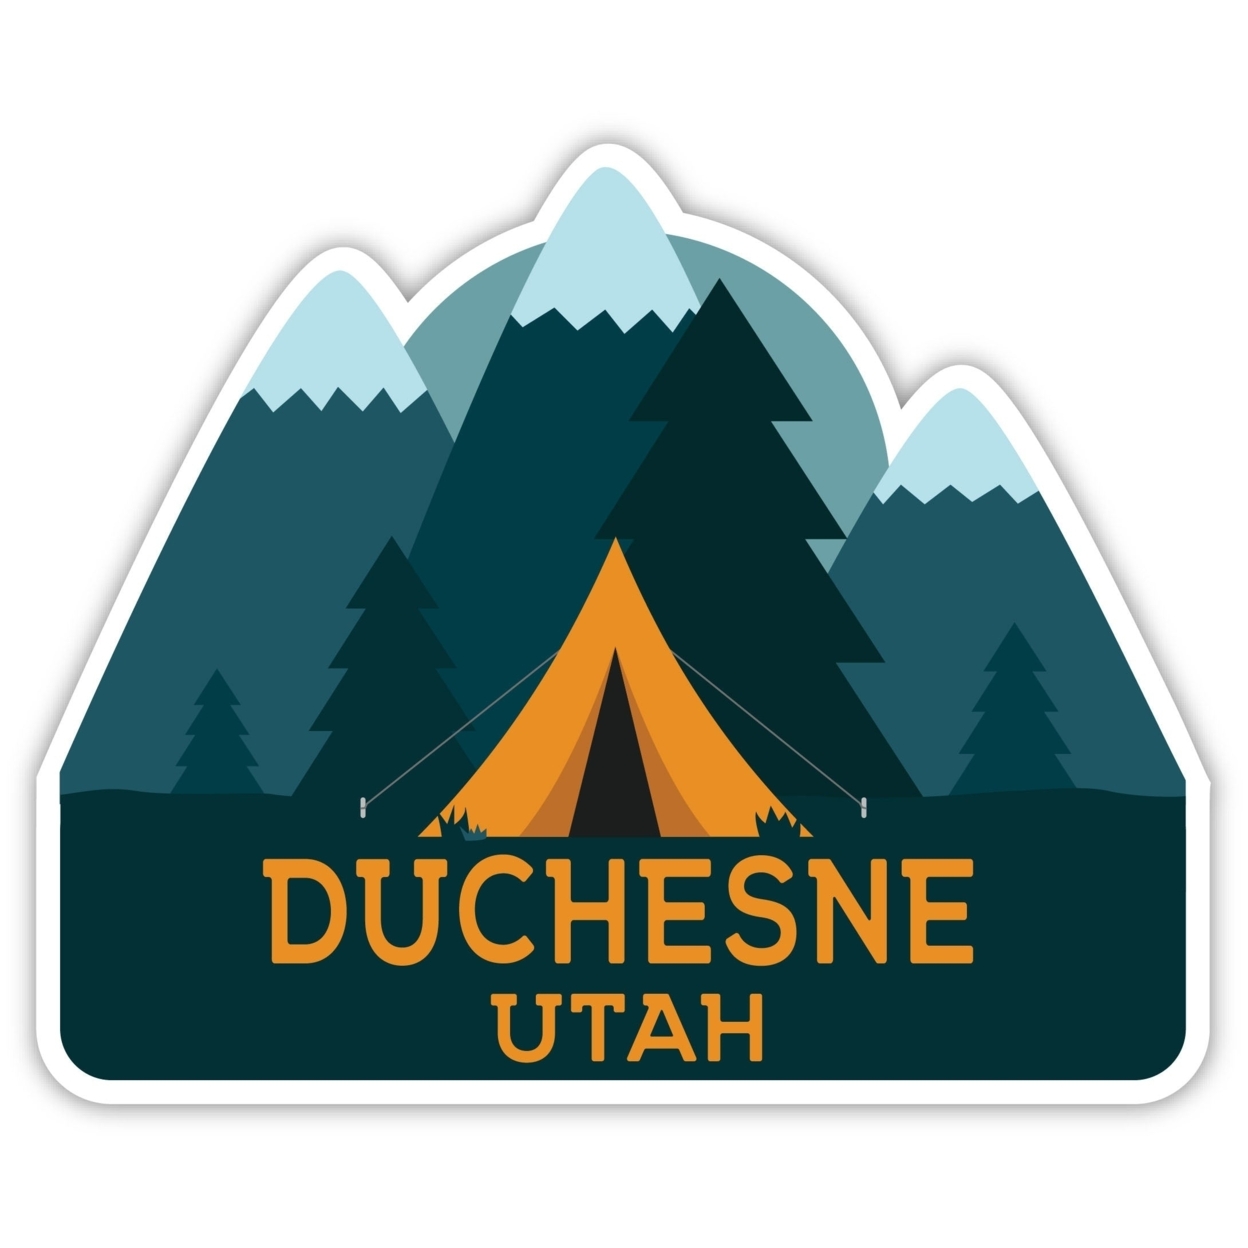 Duchesne Utah Souvenir Decorative Stickers (Choose Theme And Size) - 4-Pack, 6-Inch, Camp Life